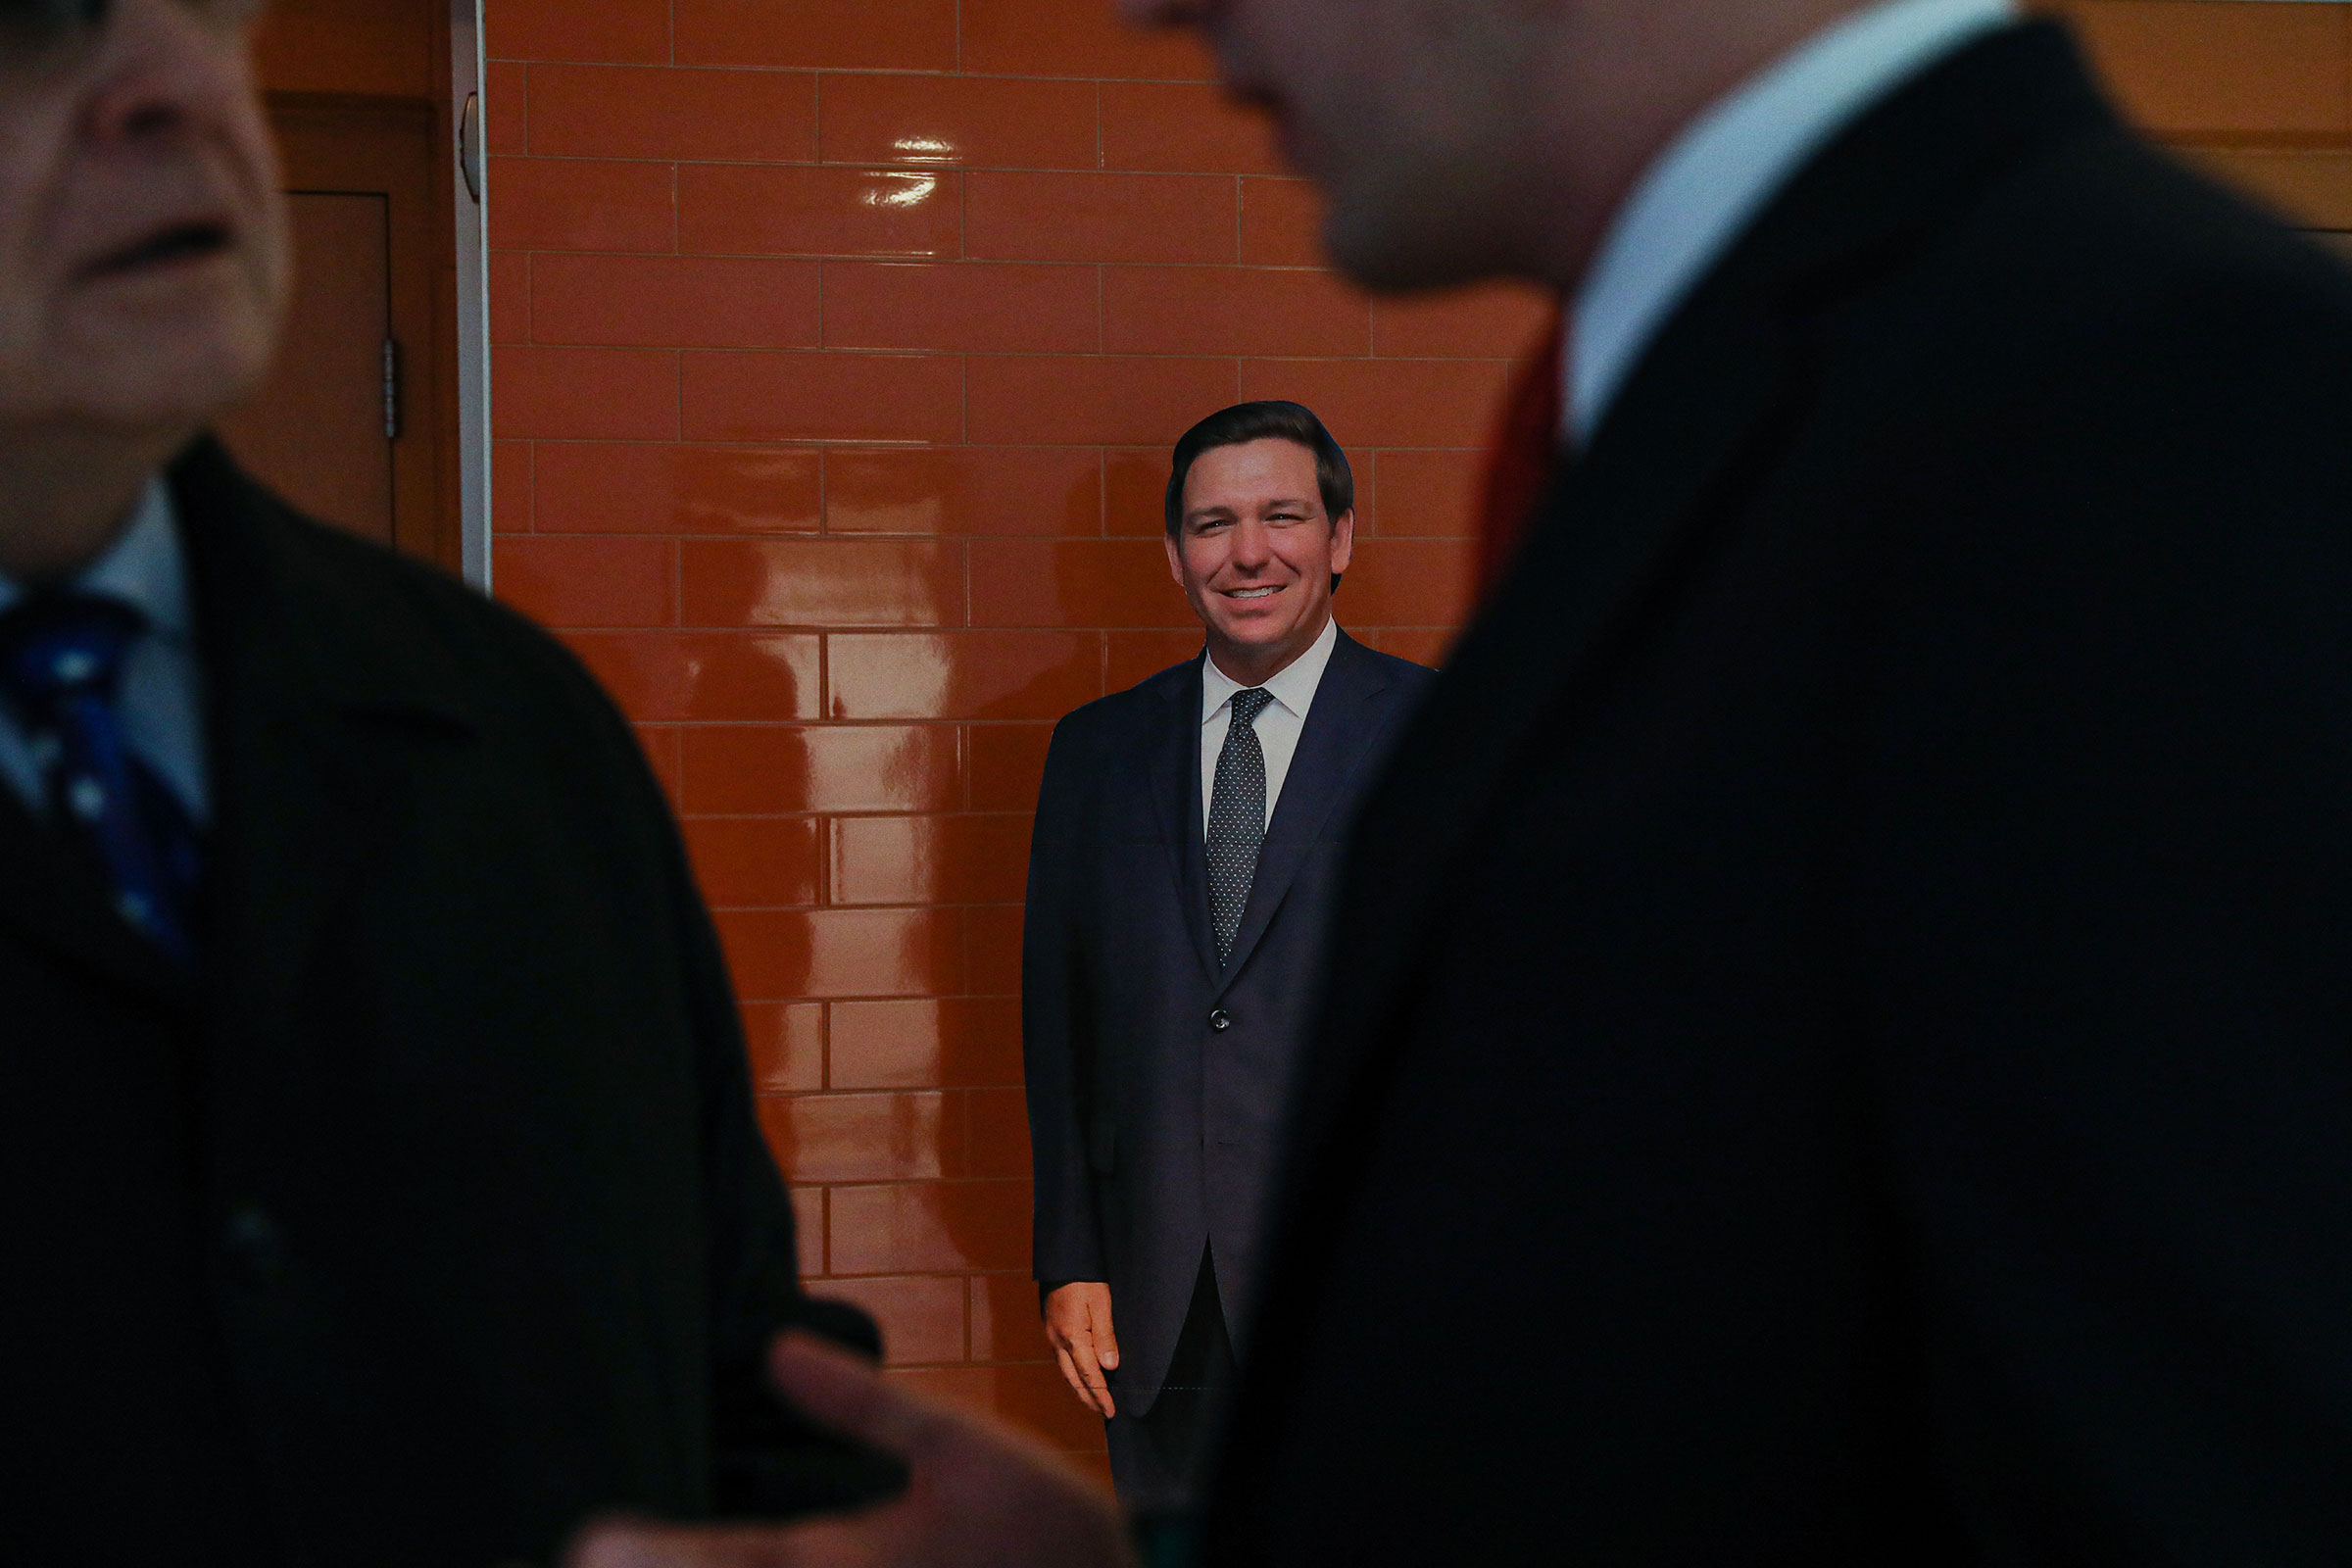 A cardboard cutout of DeSantis stands against a wall at the New Hampshire Republican State Committee fundraiser on Jan. 28 (Cheryl Senter—The Washington Post/Getty Images)